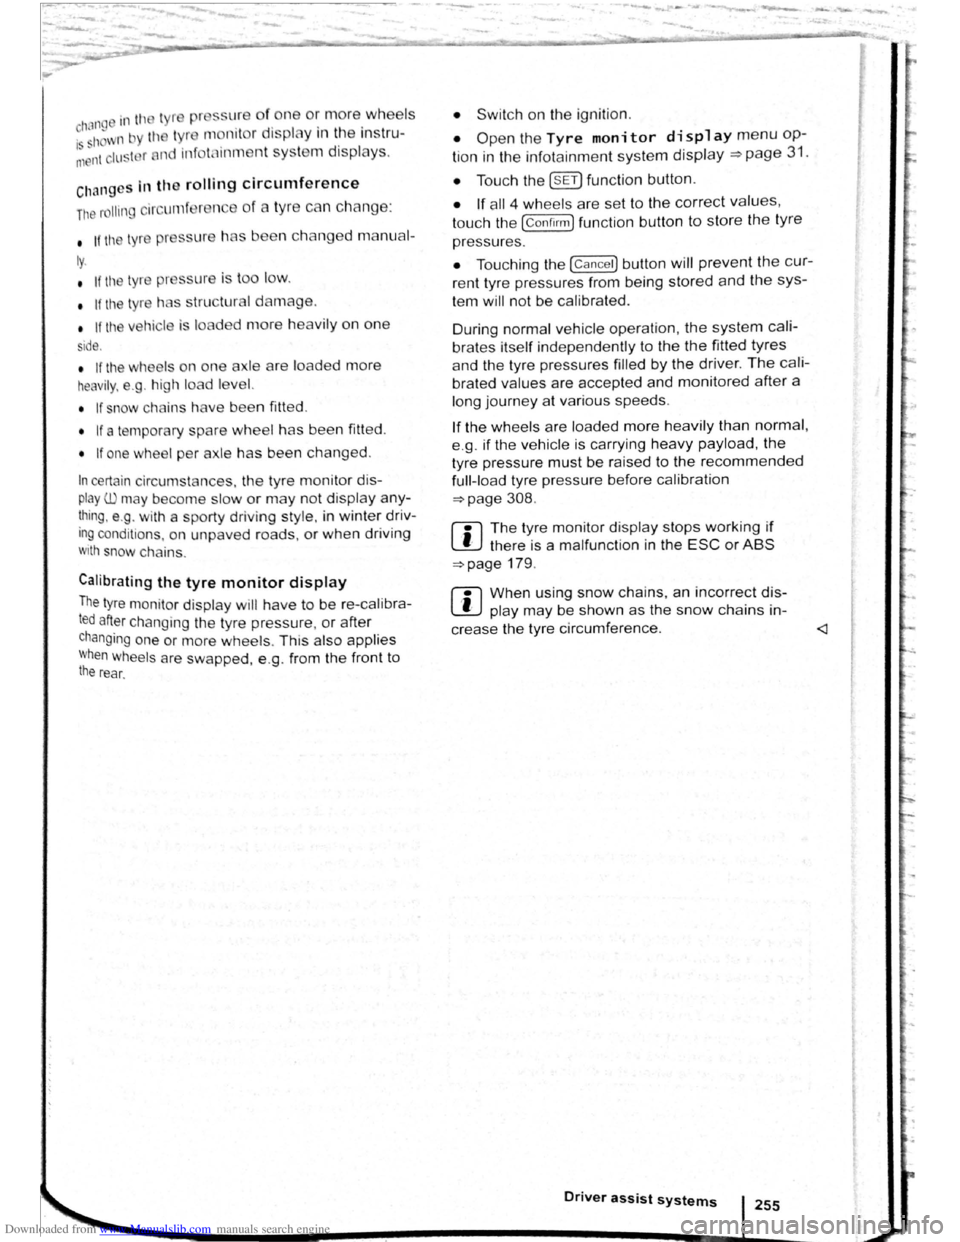 VOLKSWAGEN SCIROCCO 2012  Owners Manual Downloaded from www.Manualslib.com manuals search engine • If tll ly . 
s i
de.  n 
ch a ng ed  manu al-
is  t
oo low. 
I lo  ded more heavily  on one 
• If tile wh el  on  one axle  are  loaded  